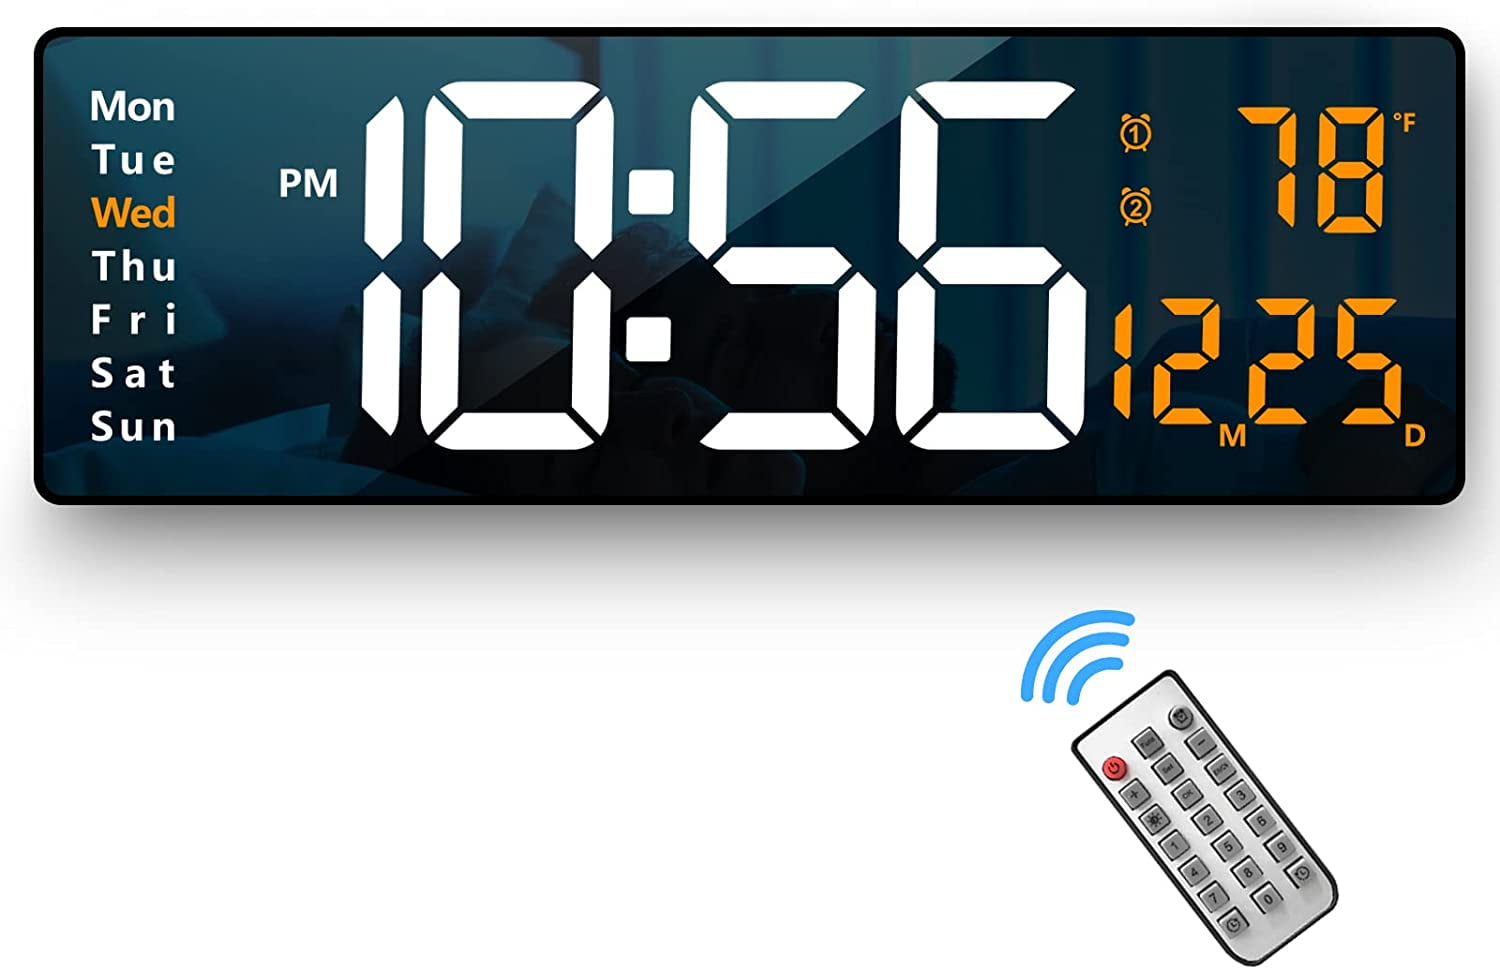 Digital Wall Clock Large Display, 16.2” LED Digital Clock with Temperature  and Auto Dimming, Easy Track The Time, Date and Day of Week, with Remote